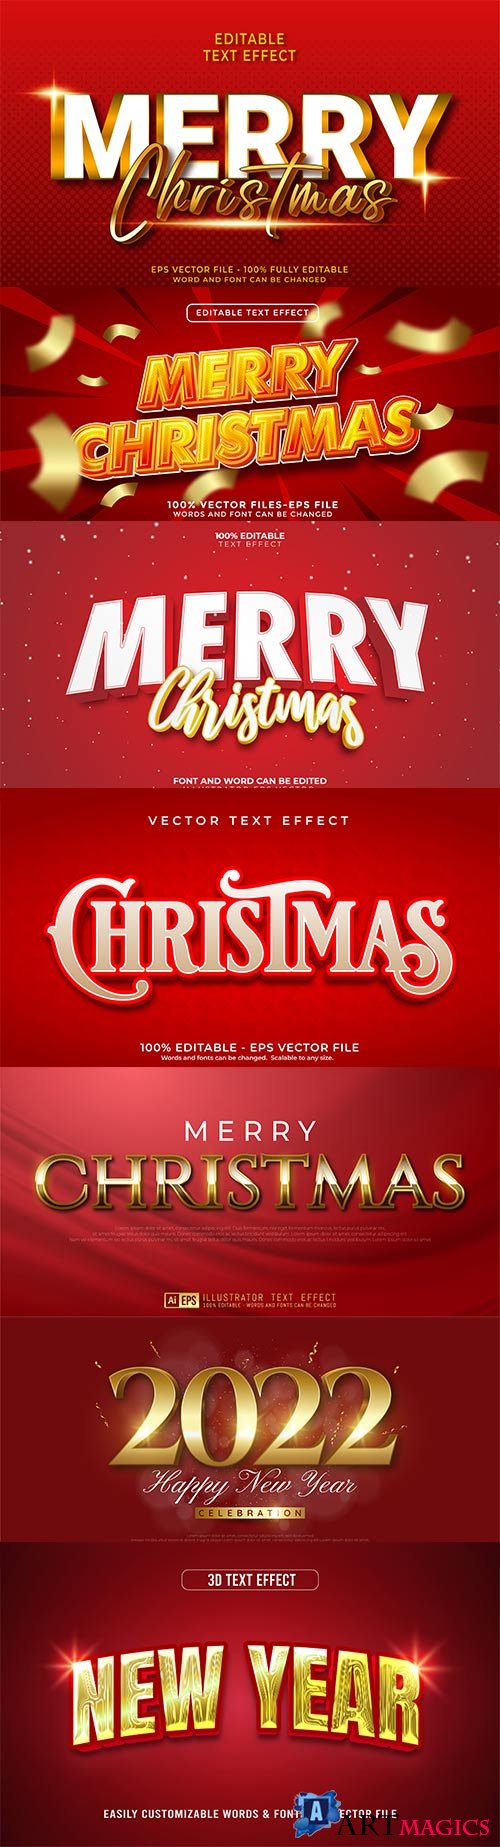 2022 New year and christmas editable text effect vector vol 21